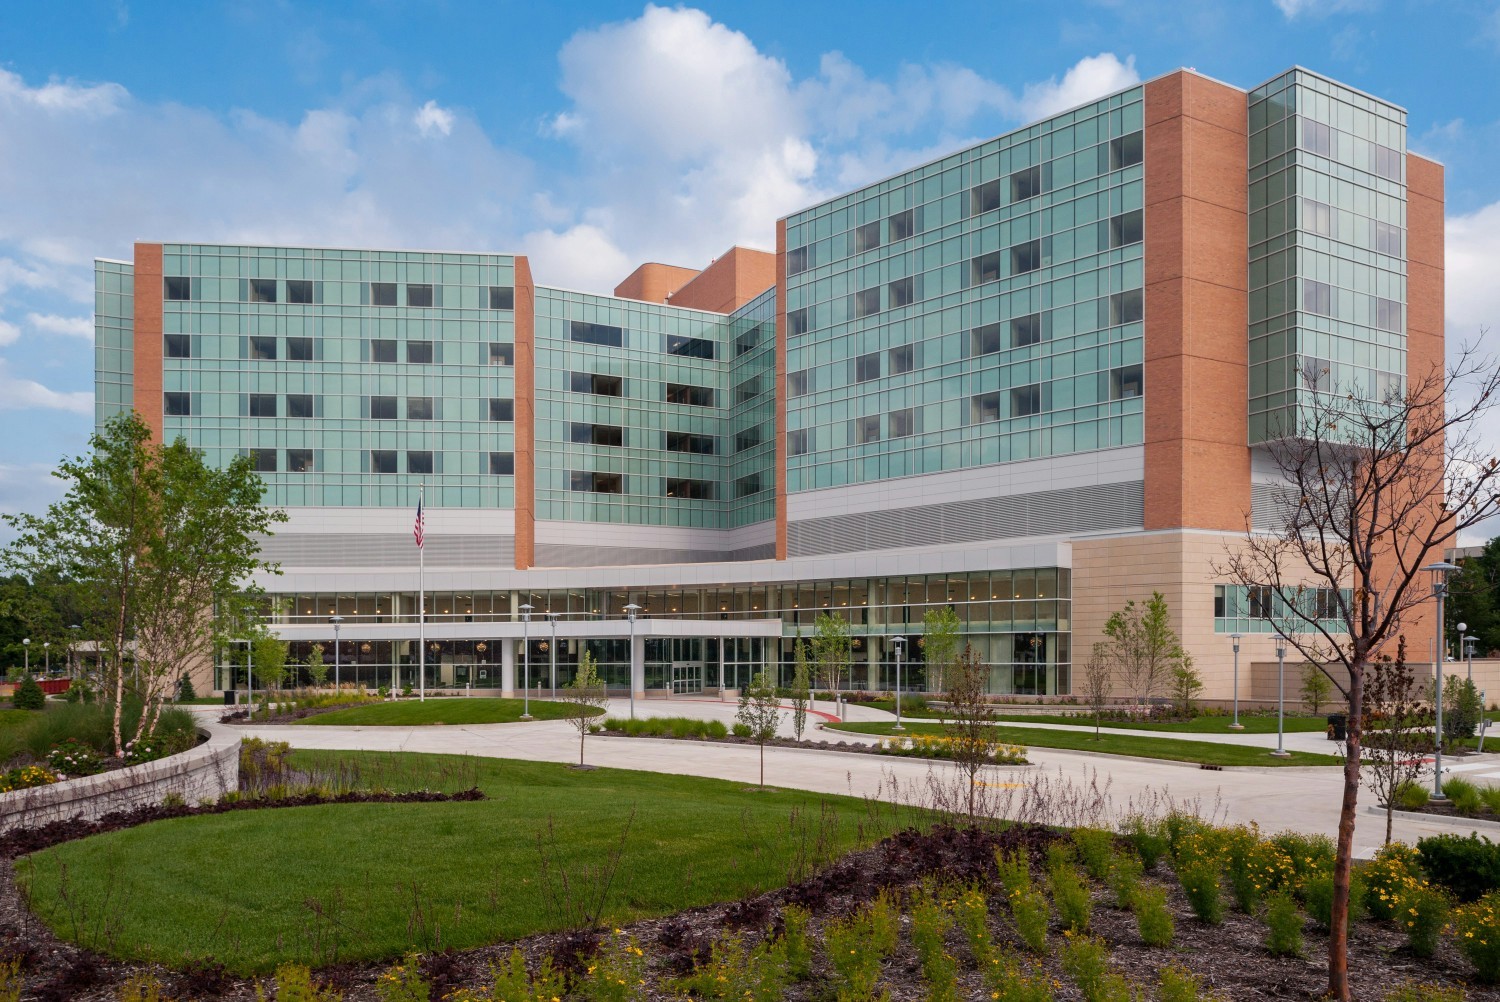 Heart & Vascular Institute, located at Carle Foundation Hospital in Urbana, IL.